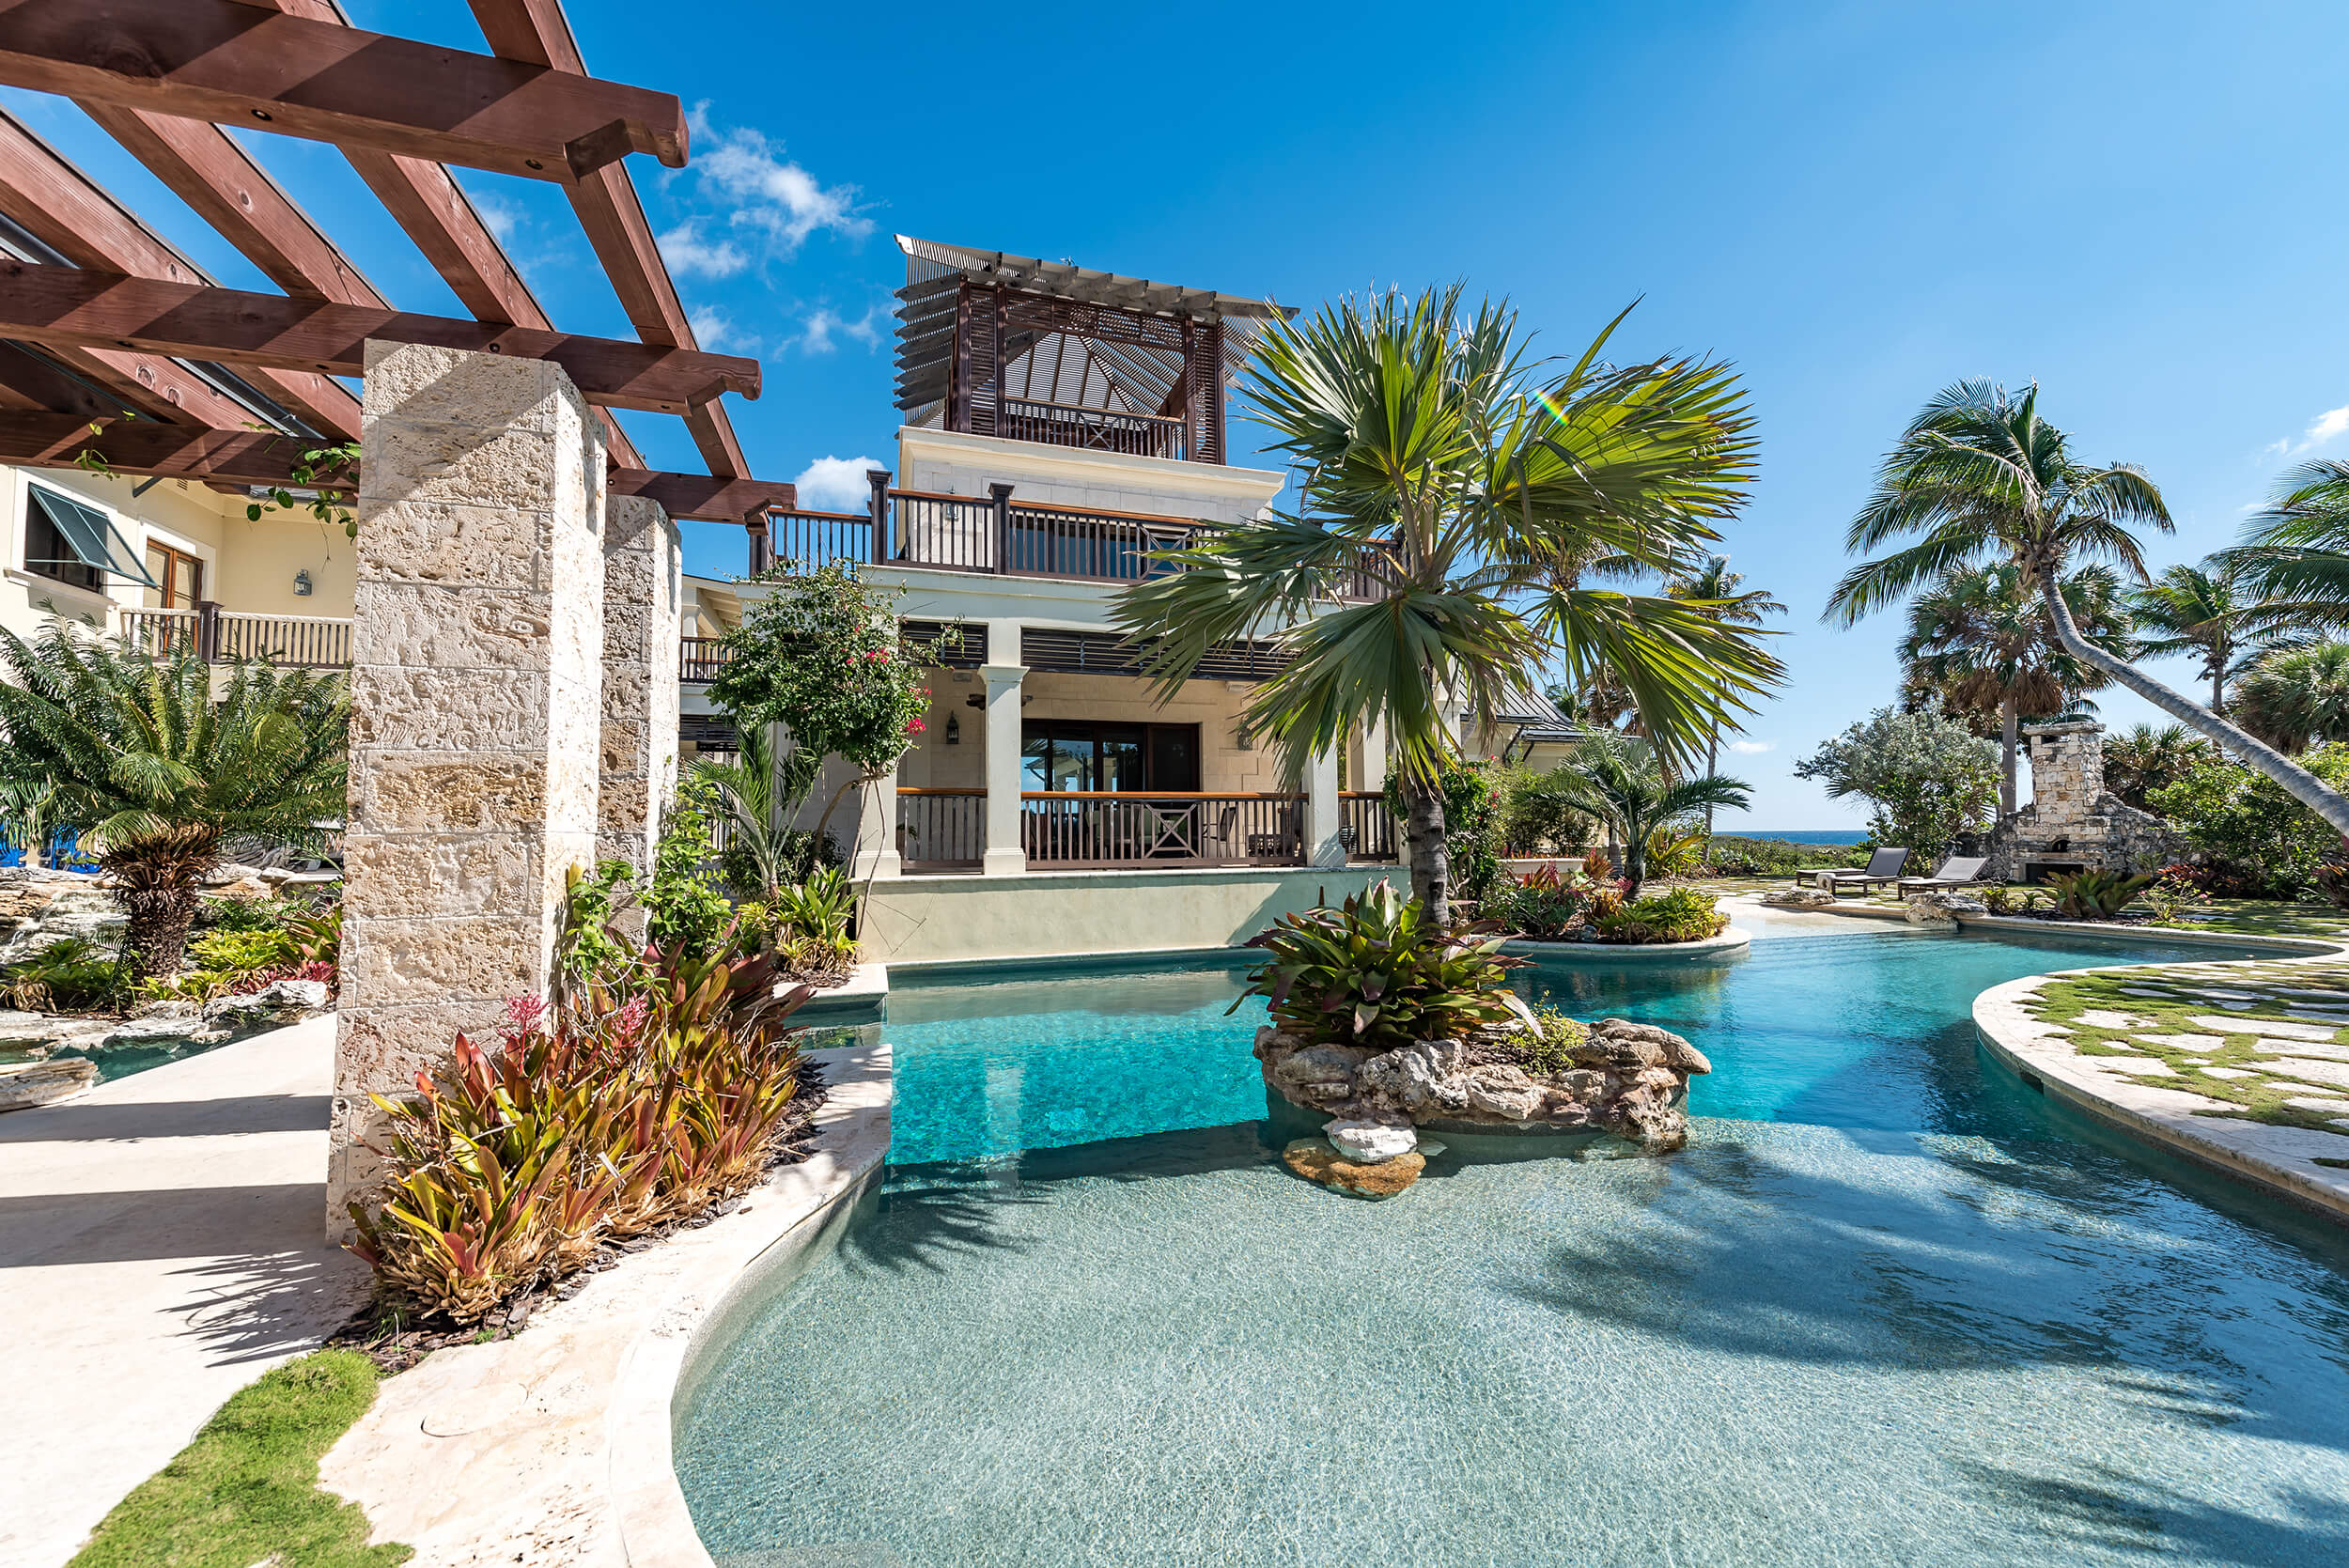 Elegant house at The Abaco Club with ocean views, symbolizing the luxury of club lifestyle and coastal living